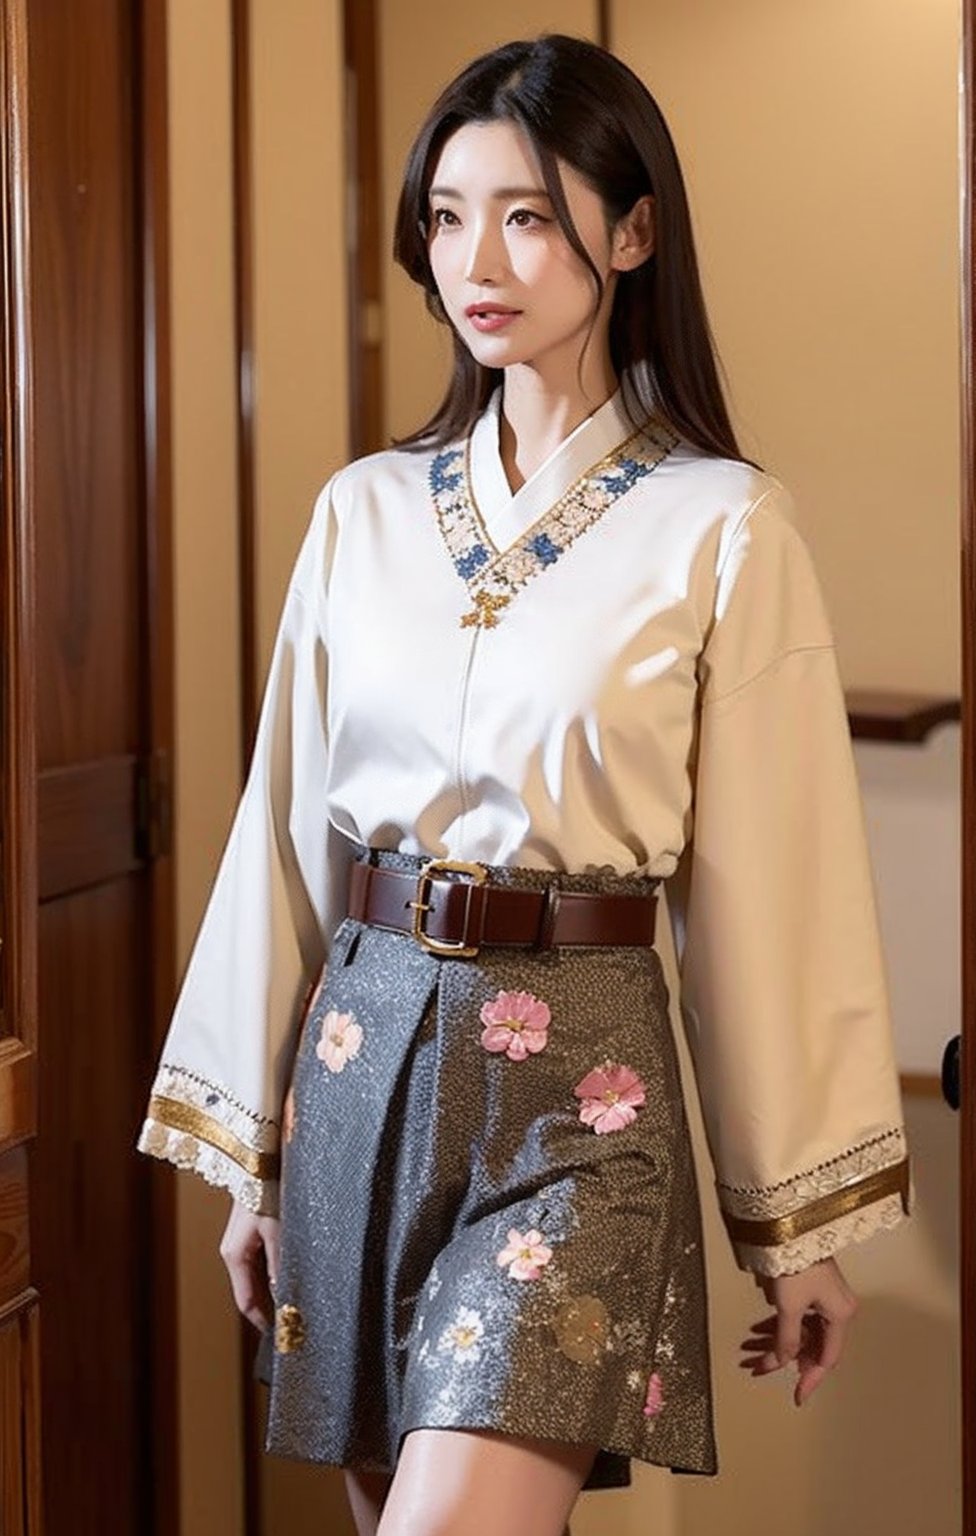 a mature Japanese woman (Lioka) standing indoors next to a wooden door frame. She has a fair complexion, dark straight hair styled neatly with a parting, and dark almond-shaped eyes with defined eyebrows. She is wearing a high-collared, long-sleeved cream blouse with a floral brooch near the collar, and a dark blue skirt with intricate floral embroidery paired with a wide, ornate gold belt. The setting should have natural light coming from the left, highlighting her calm and composed expression, blending traditional and elegant styles,Lioka